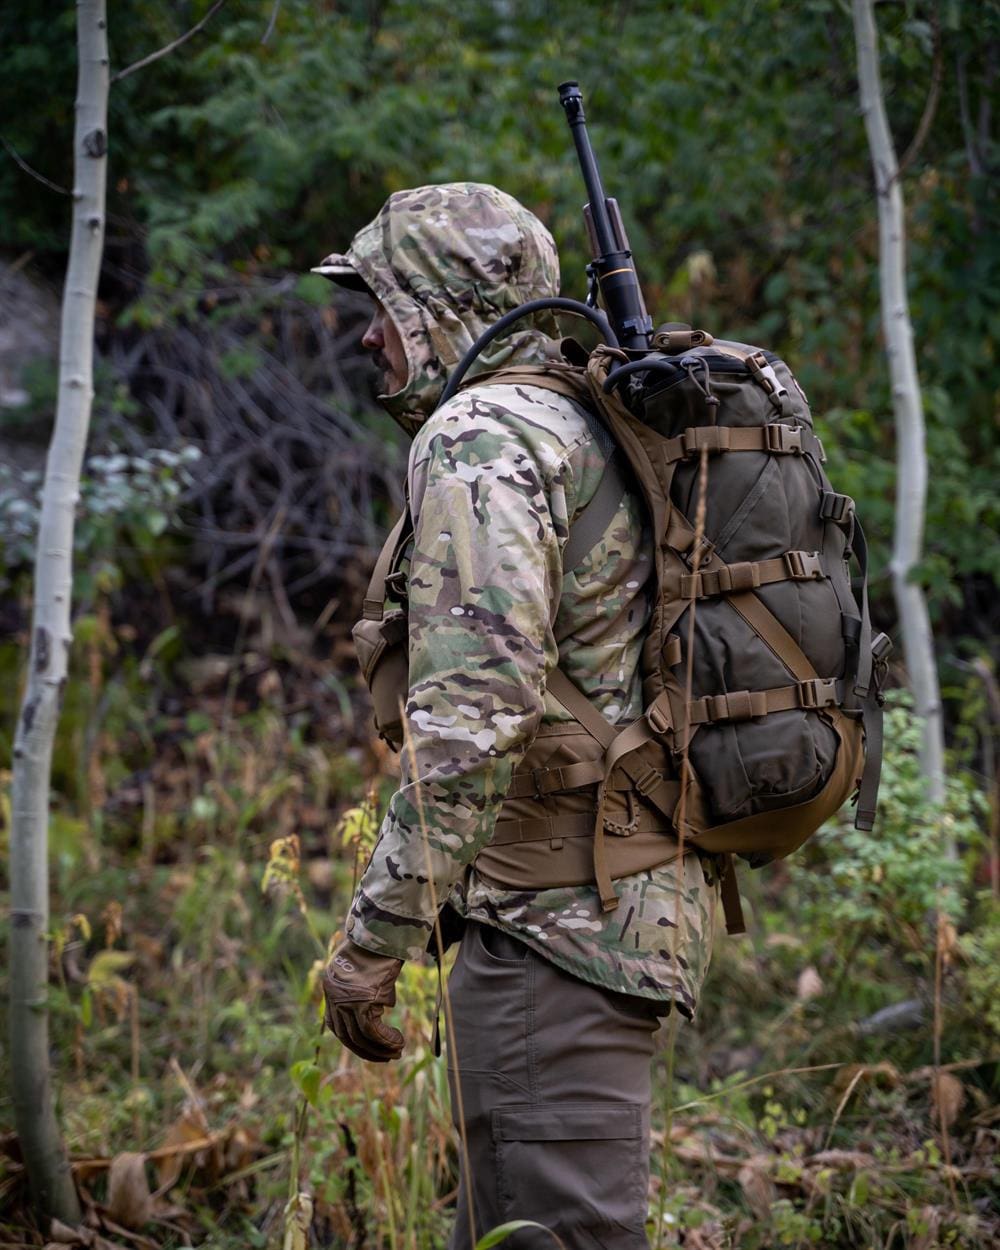 Hill People Gear - Decker Pack System Expanded | Soldier Systems Daily ...